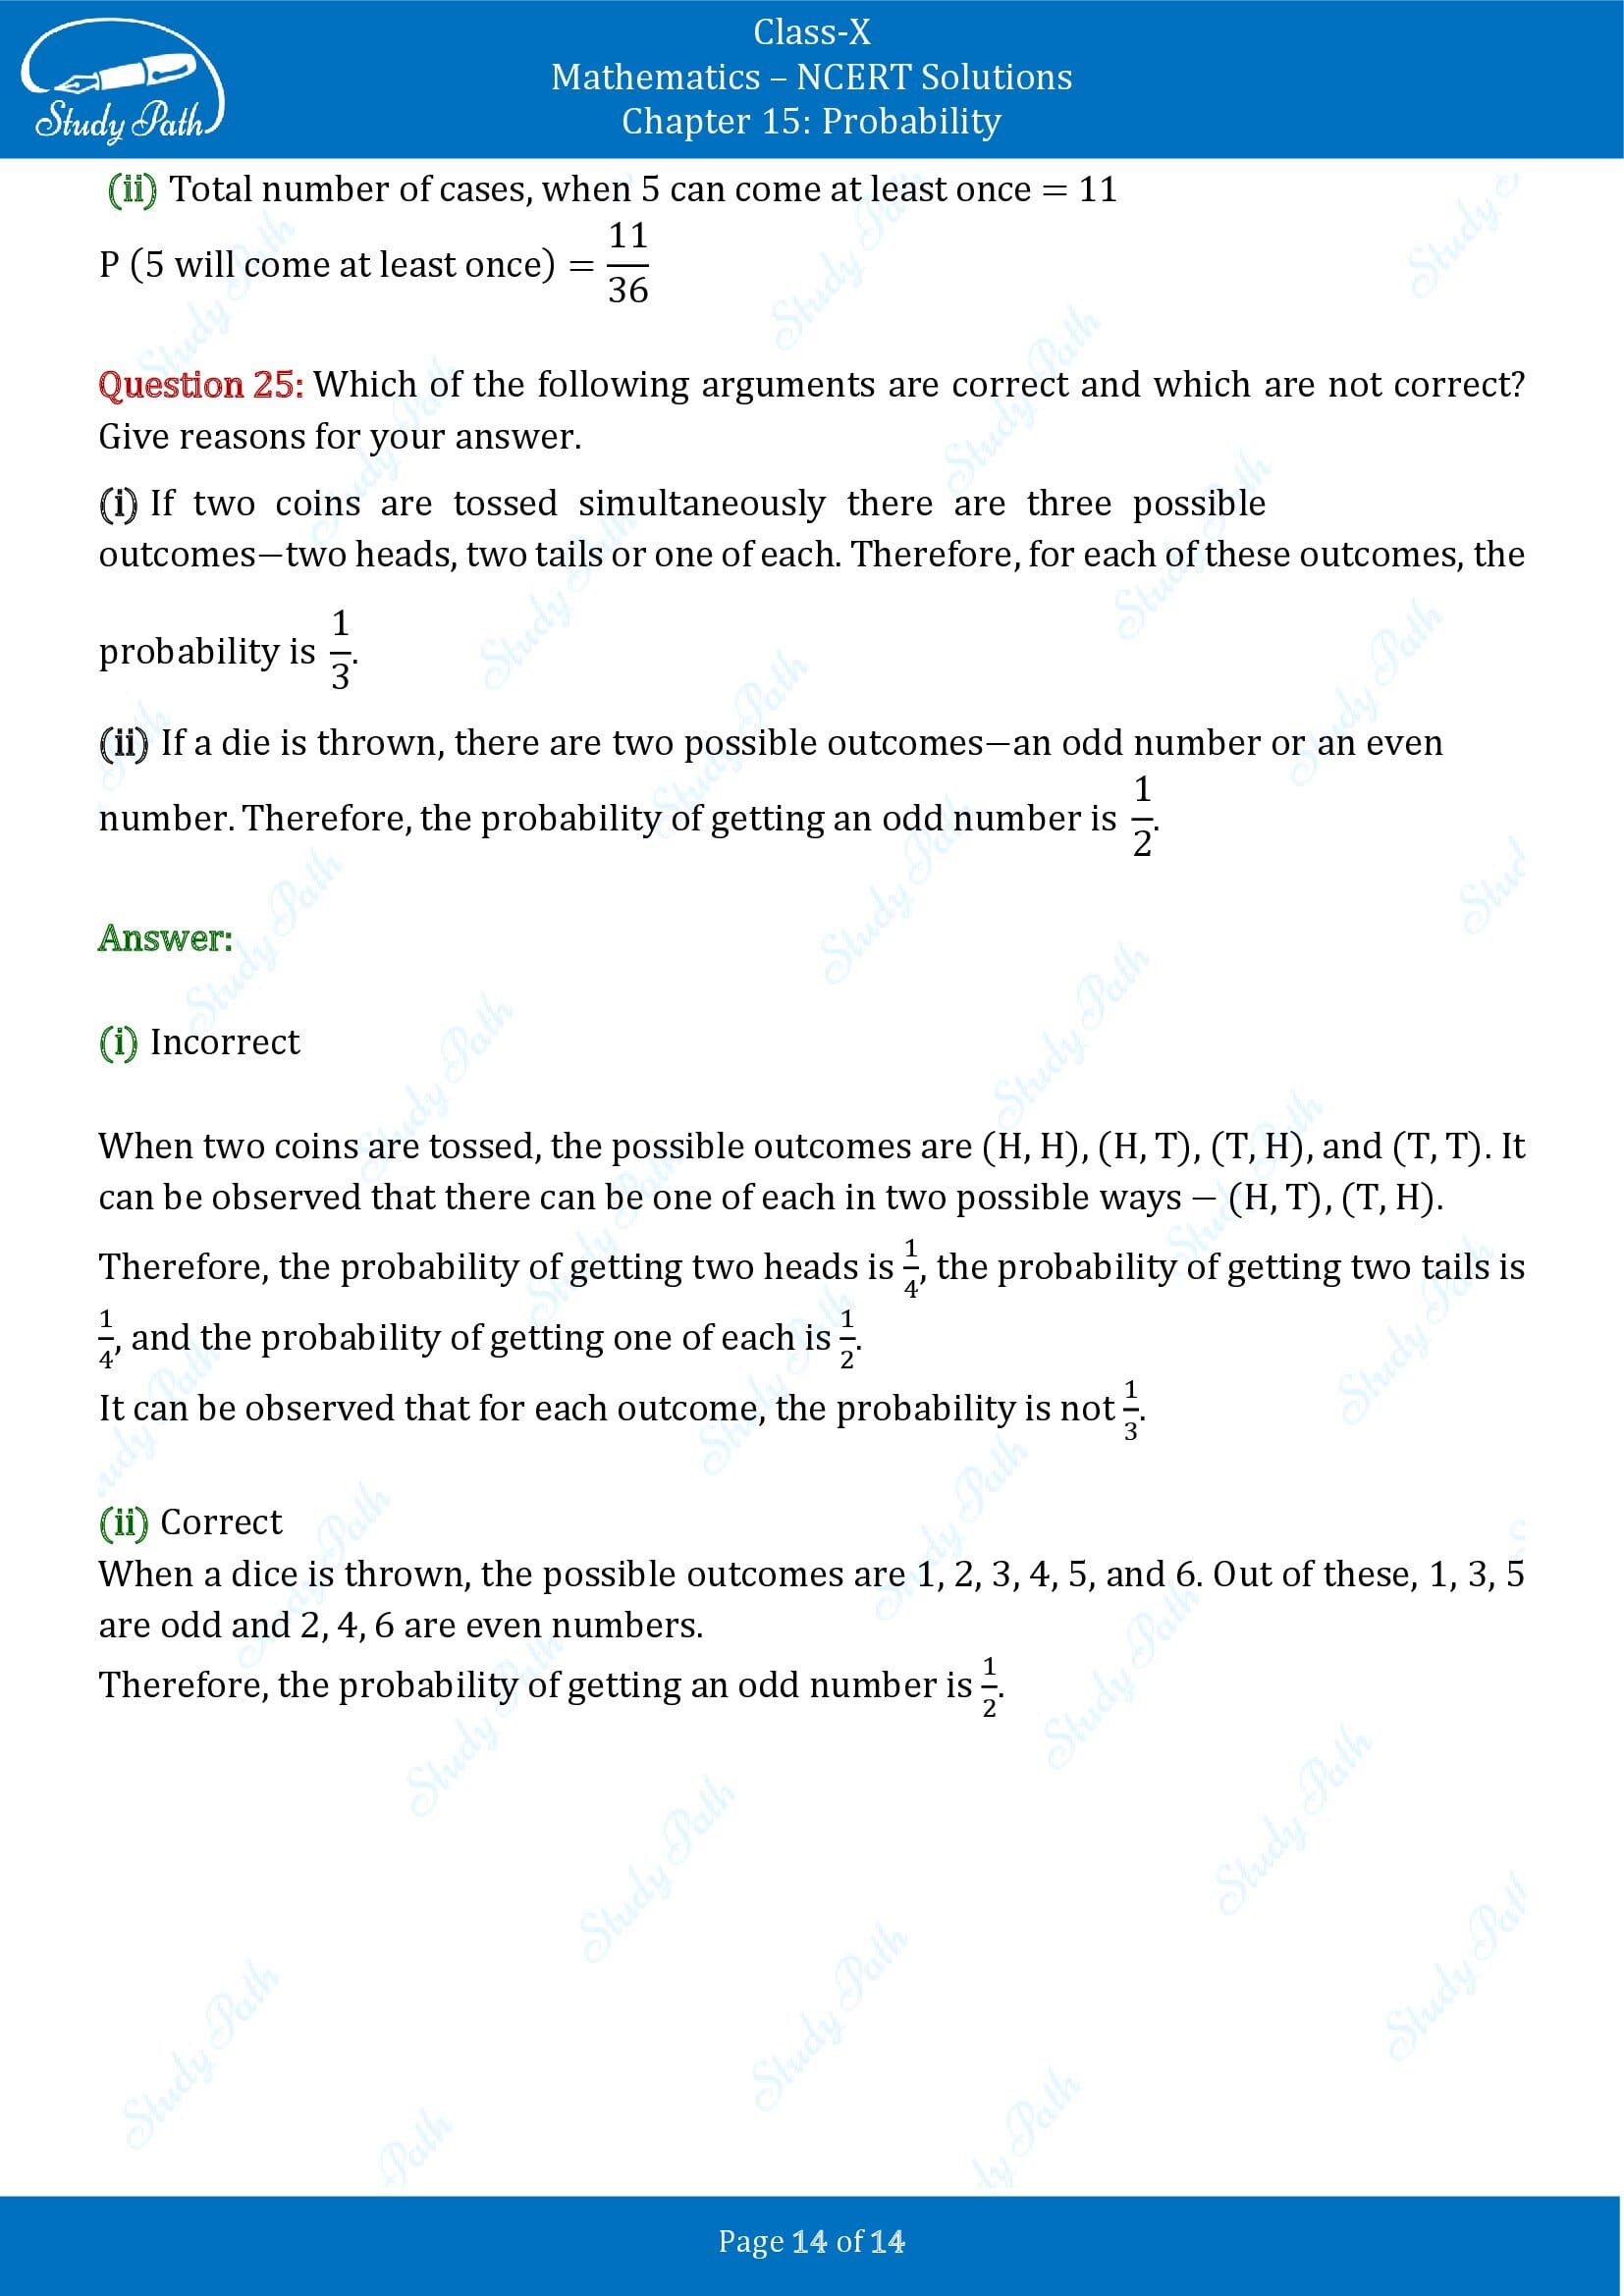 NCERT Solutions for Class 10 Maths Chapter 15 Probability Exercise 15.1 00014